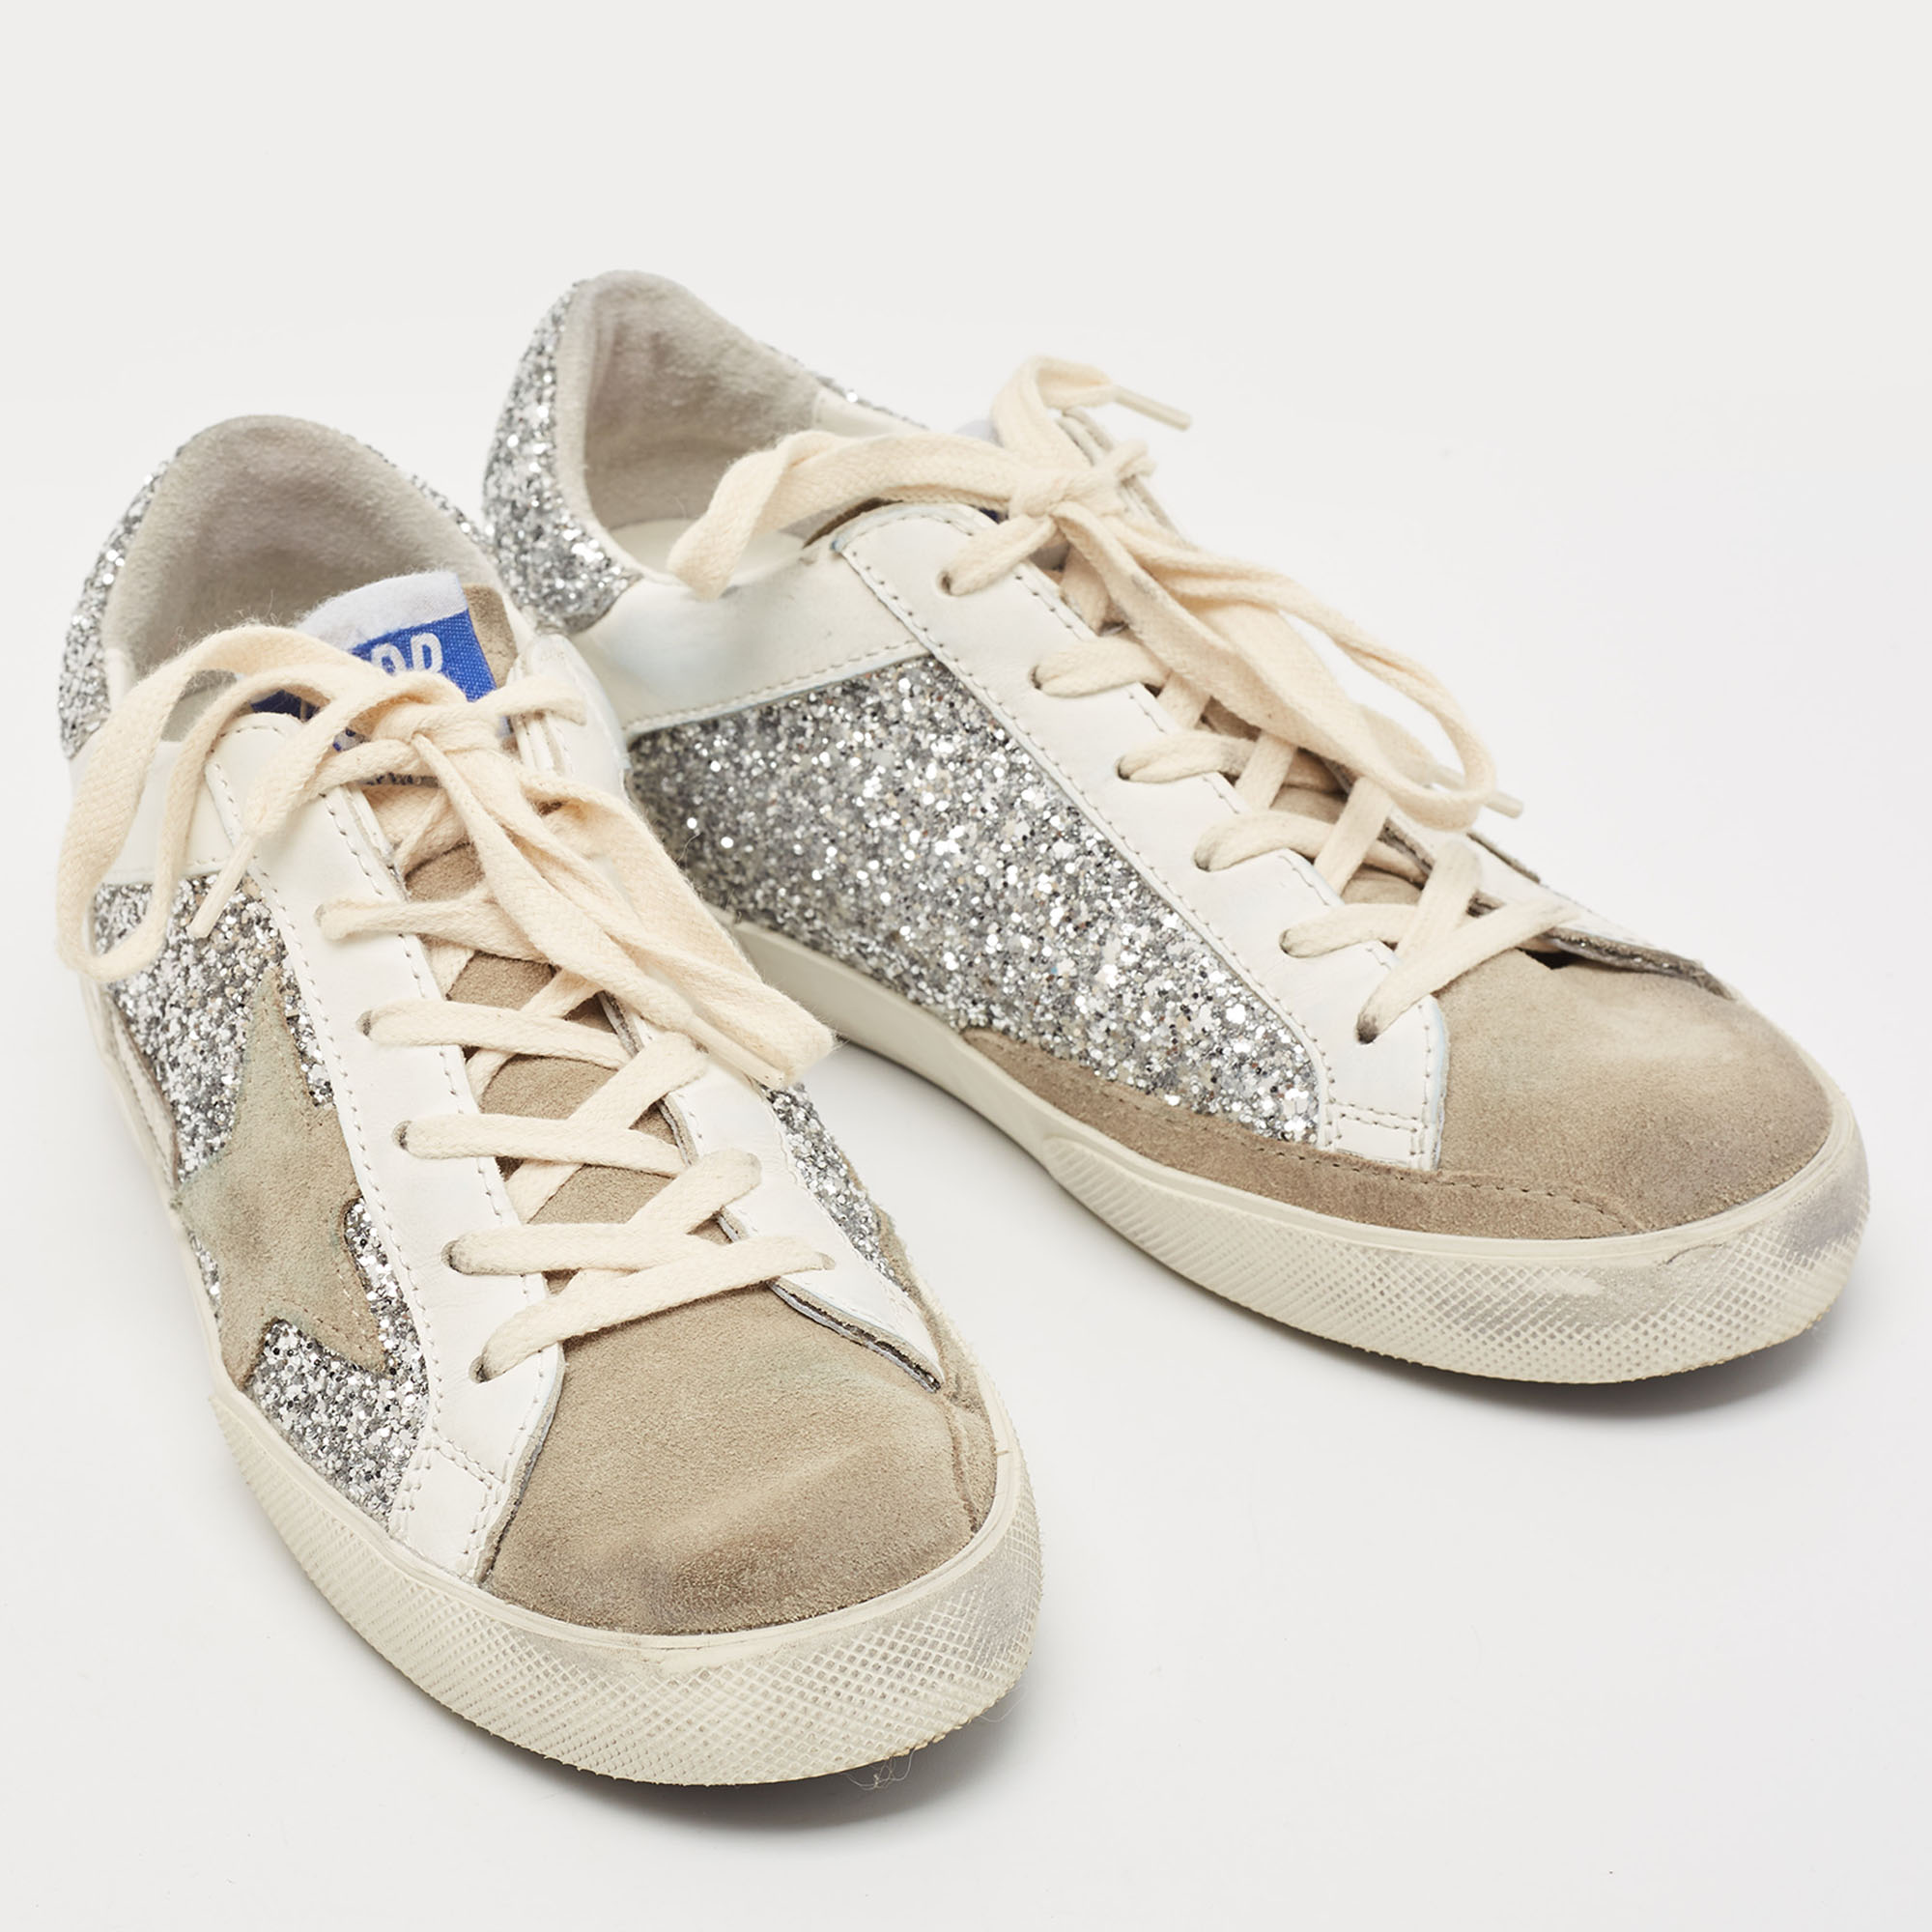 Golden Goose White/Grey Suede And Leather Superstar Sneakers Size 36